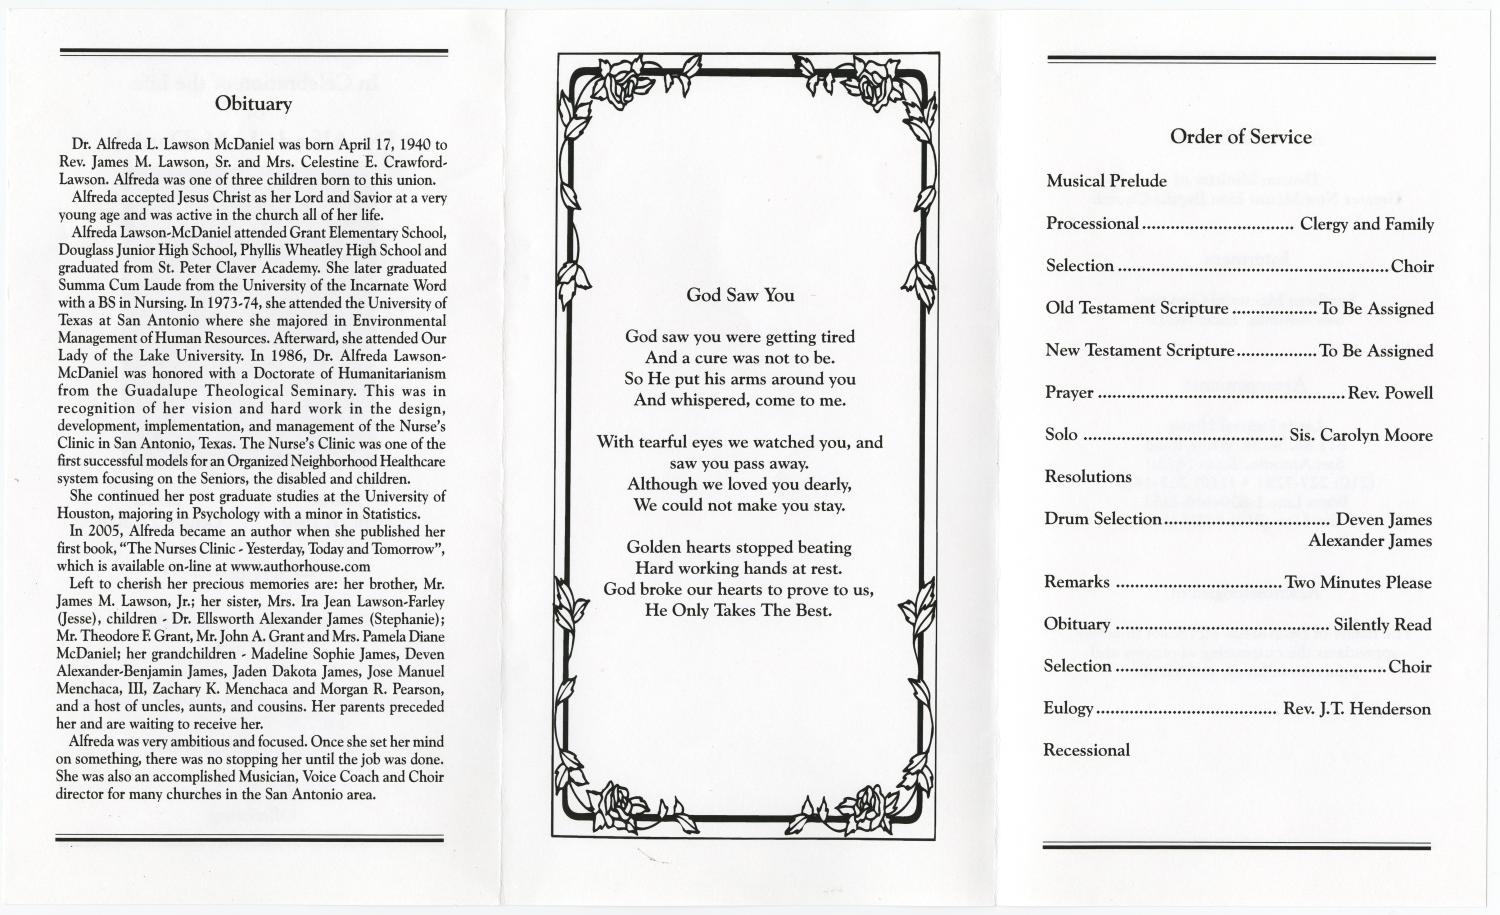 [Funeral Program for Alfreda L. McDaniel, October 29, 2005]
                                                
                                                    [Sequence #]: 2 of 3
                                                